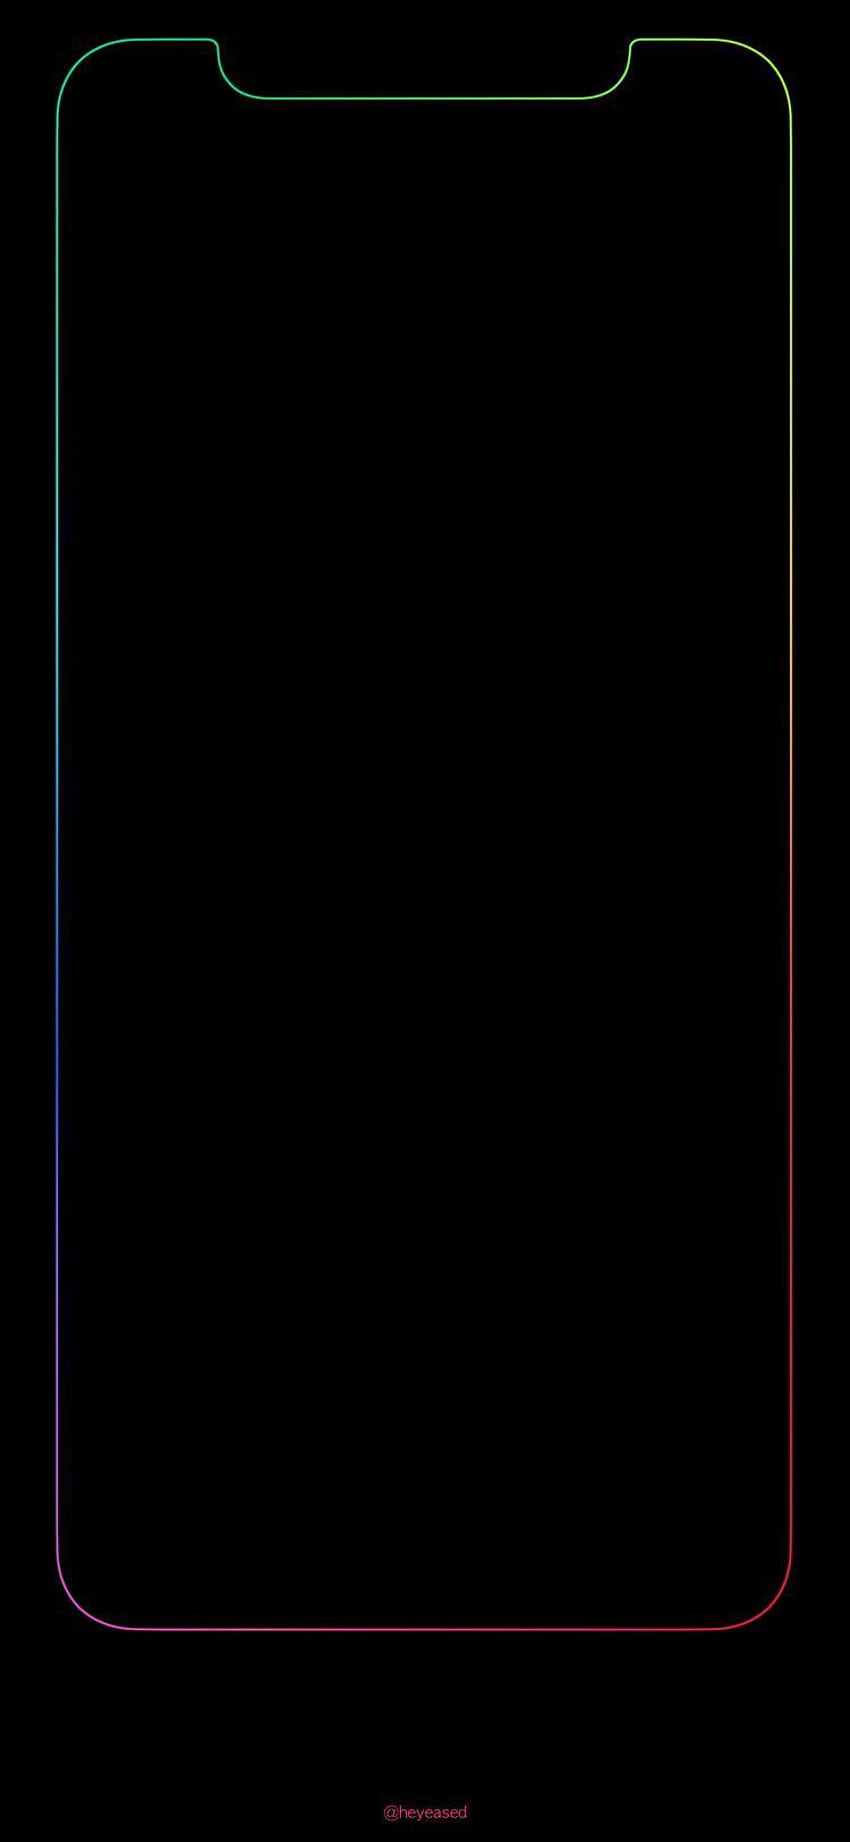 My current for the iPhone X, looks even more amazing in a dark environment! : iphone HD phone wallpaper